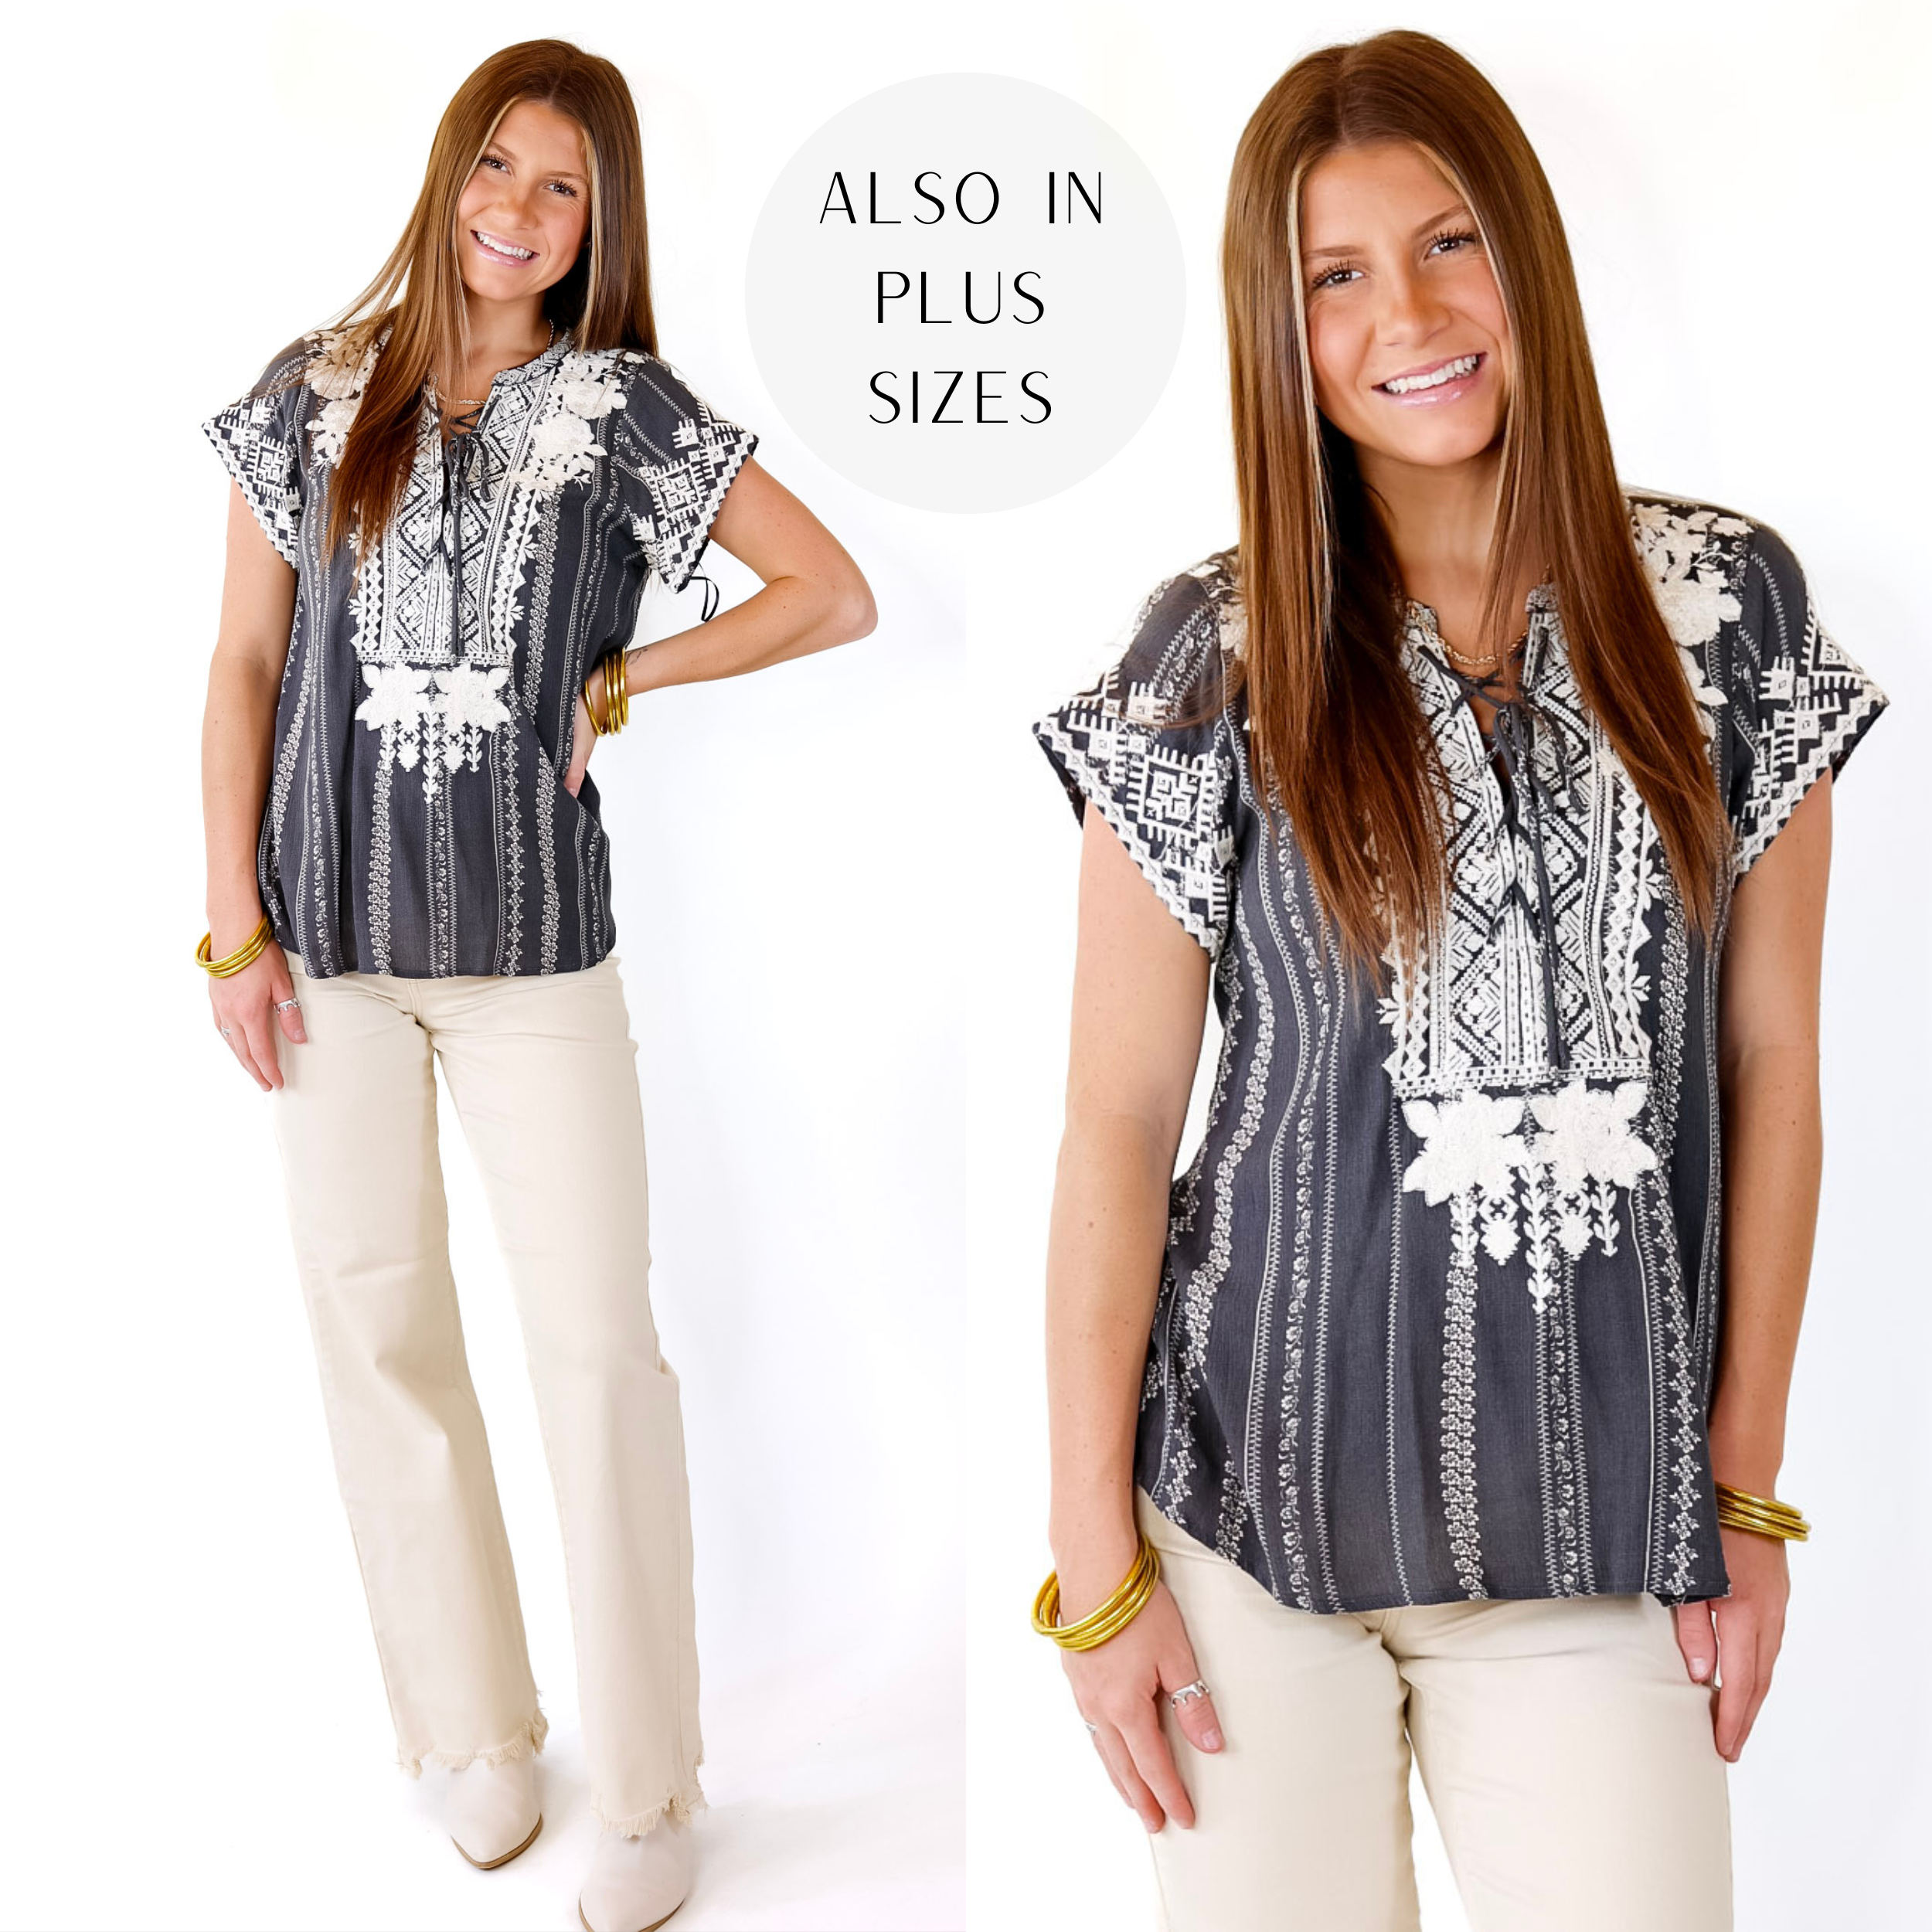 Coastal Comfort Floral Embroidered Top with Criss Cross Neckline in Charcoal Grey - Giddy Up Glamour Boutique